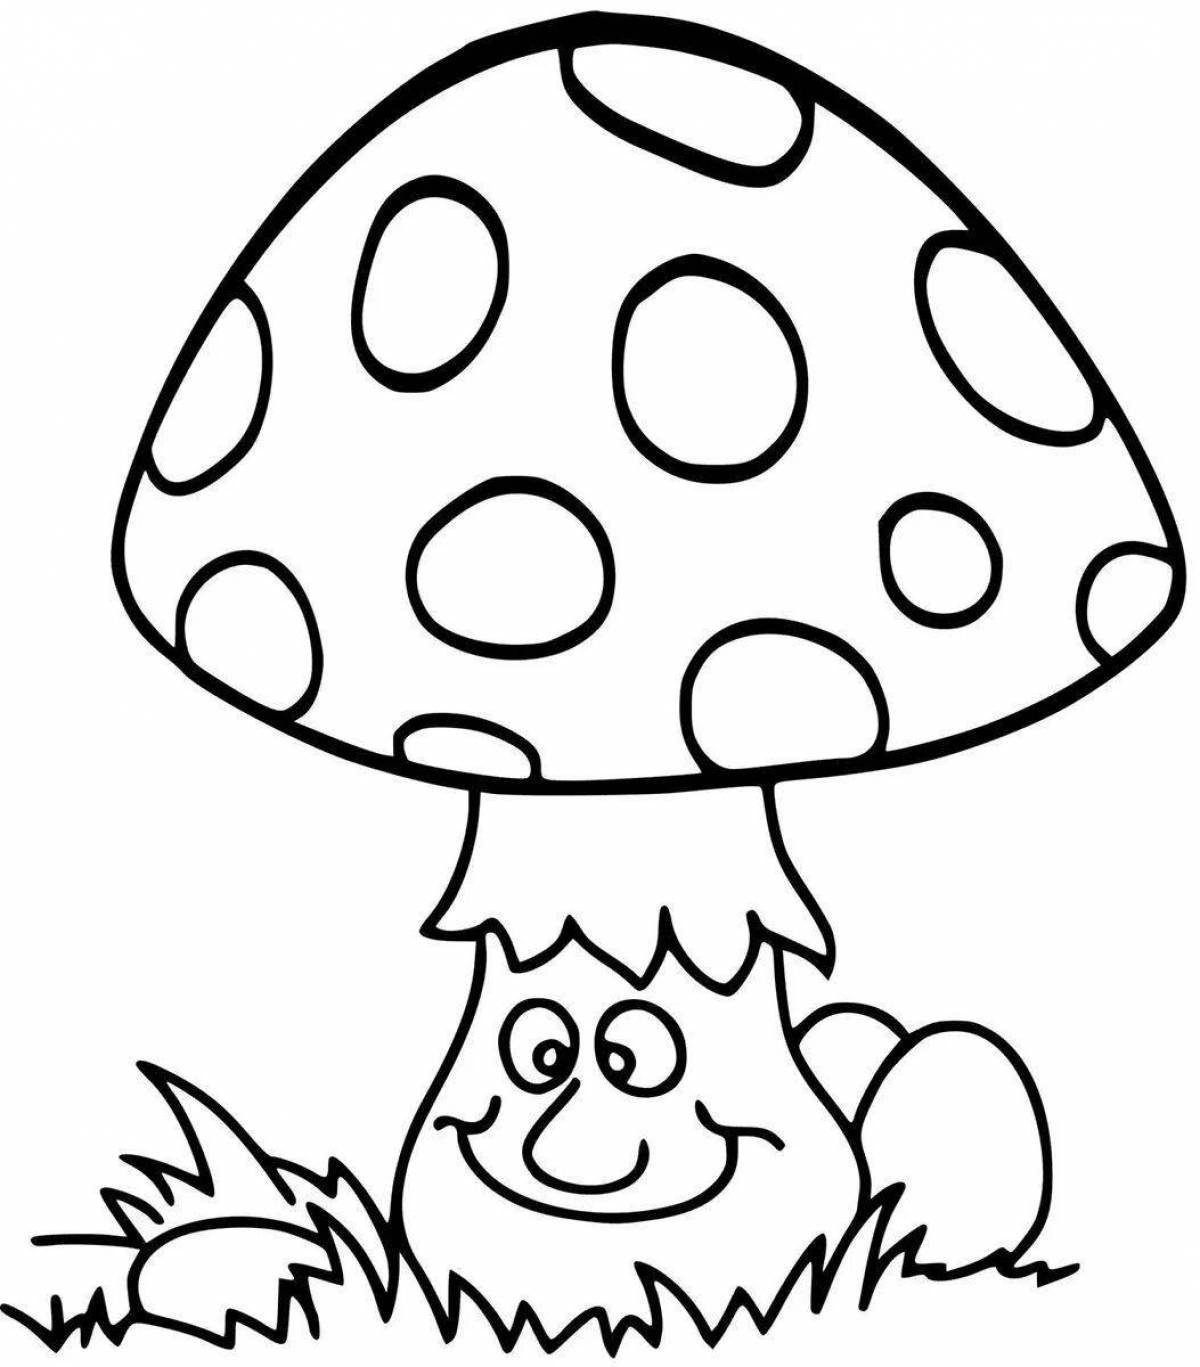 Radiant toadstool coloring book